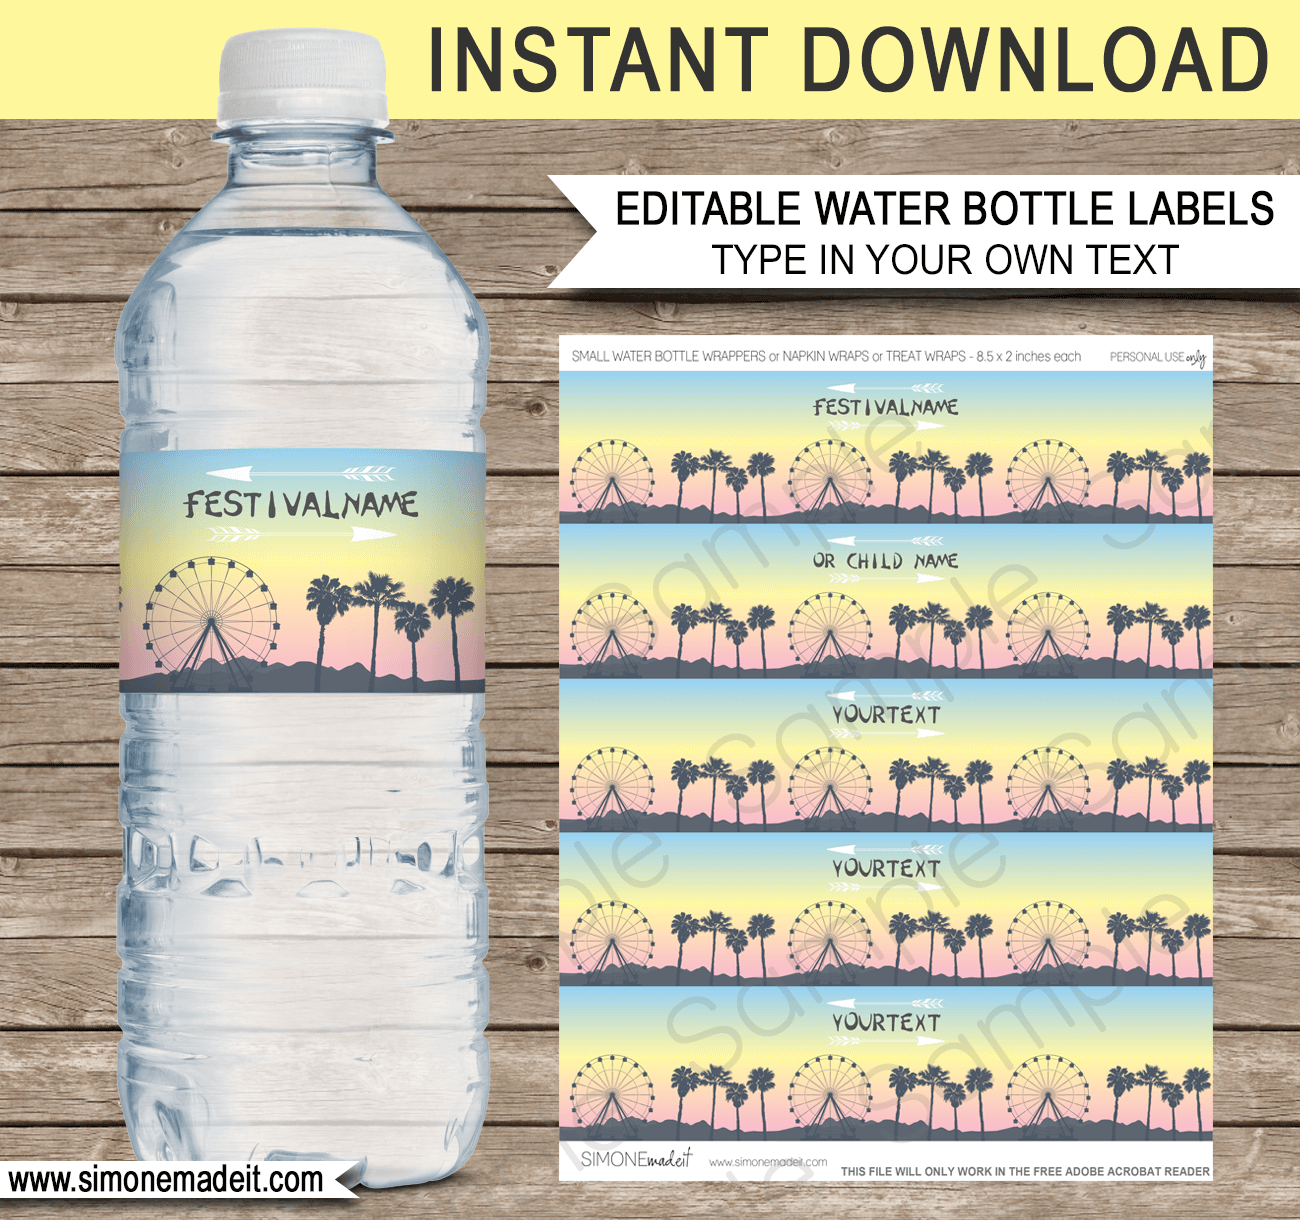 Printable Festival Themed Party Water Bottle Labels | Birthday Party Decorations | Editable DIY Template | Fete, Gala, Fair, Carnival, Music Festival | INSTANT DOWNLOAD via SIMONEmadeit.com